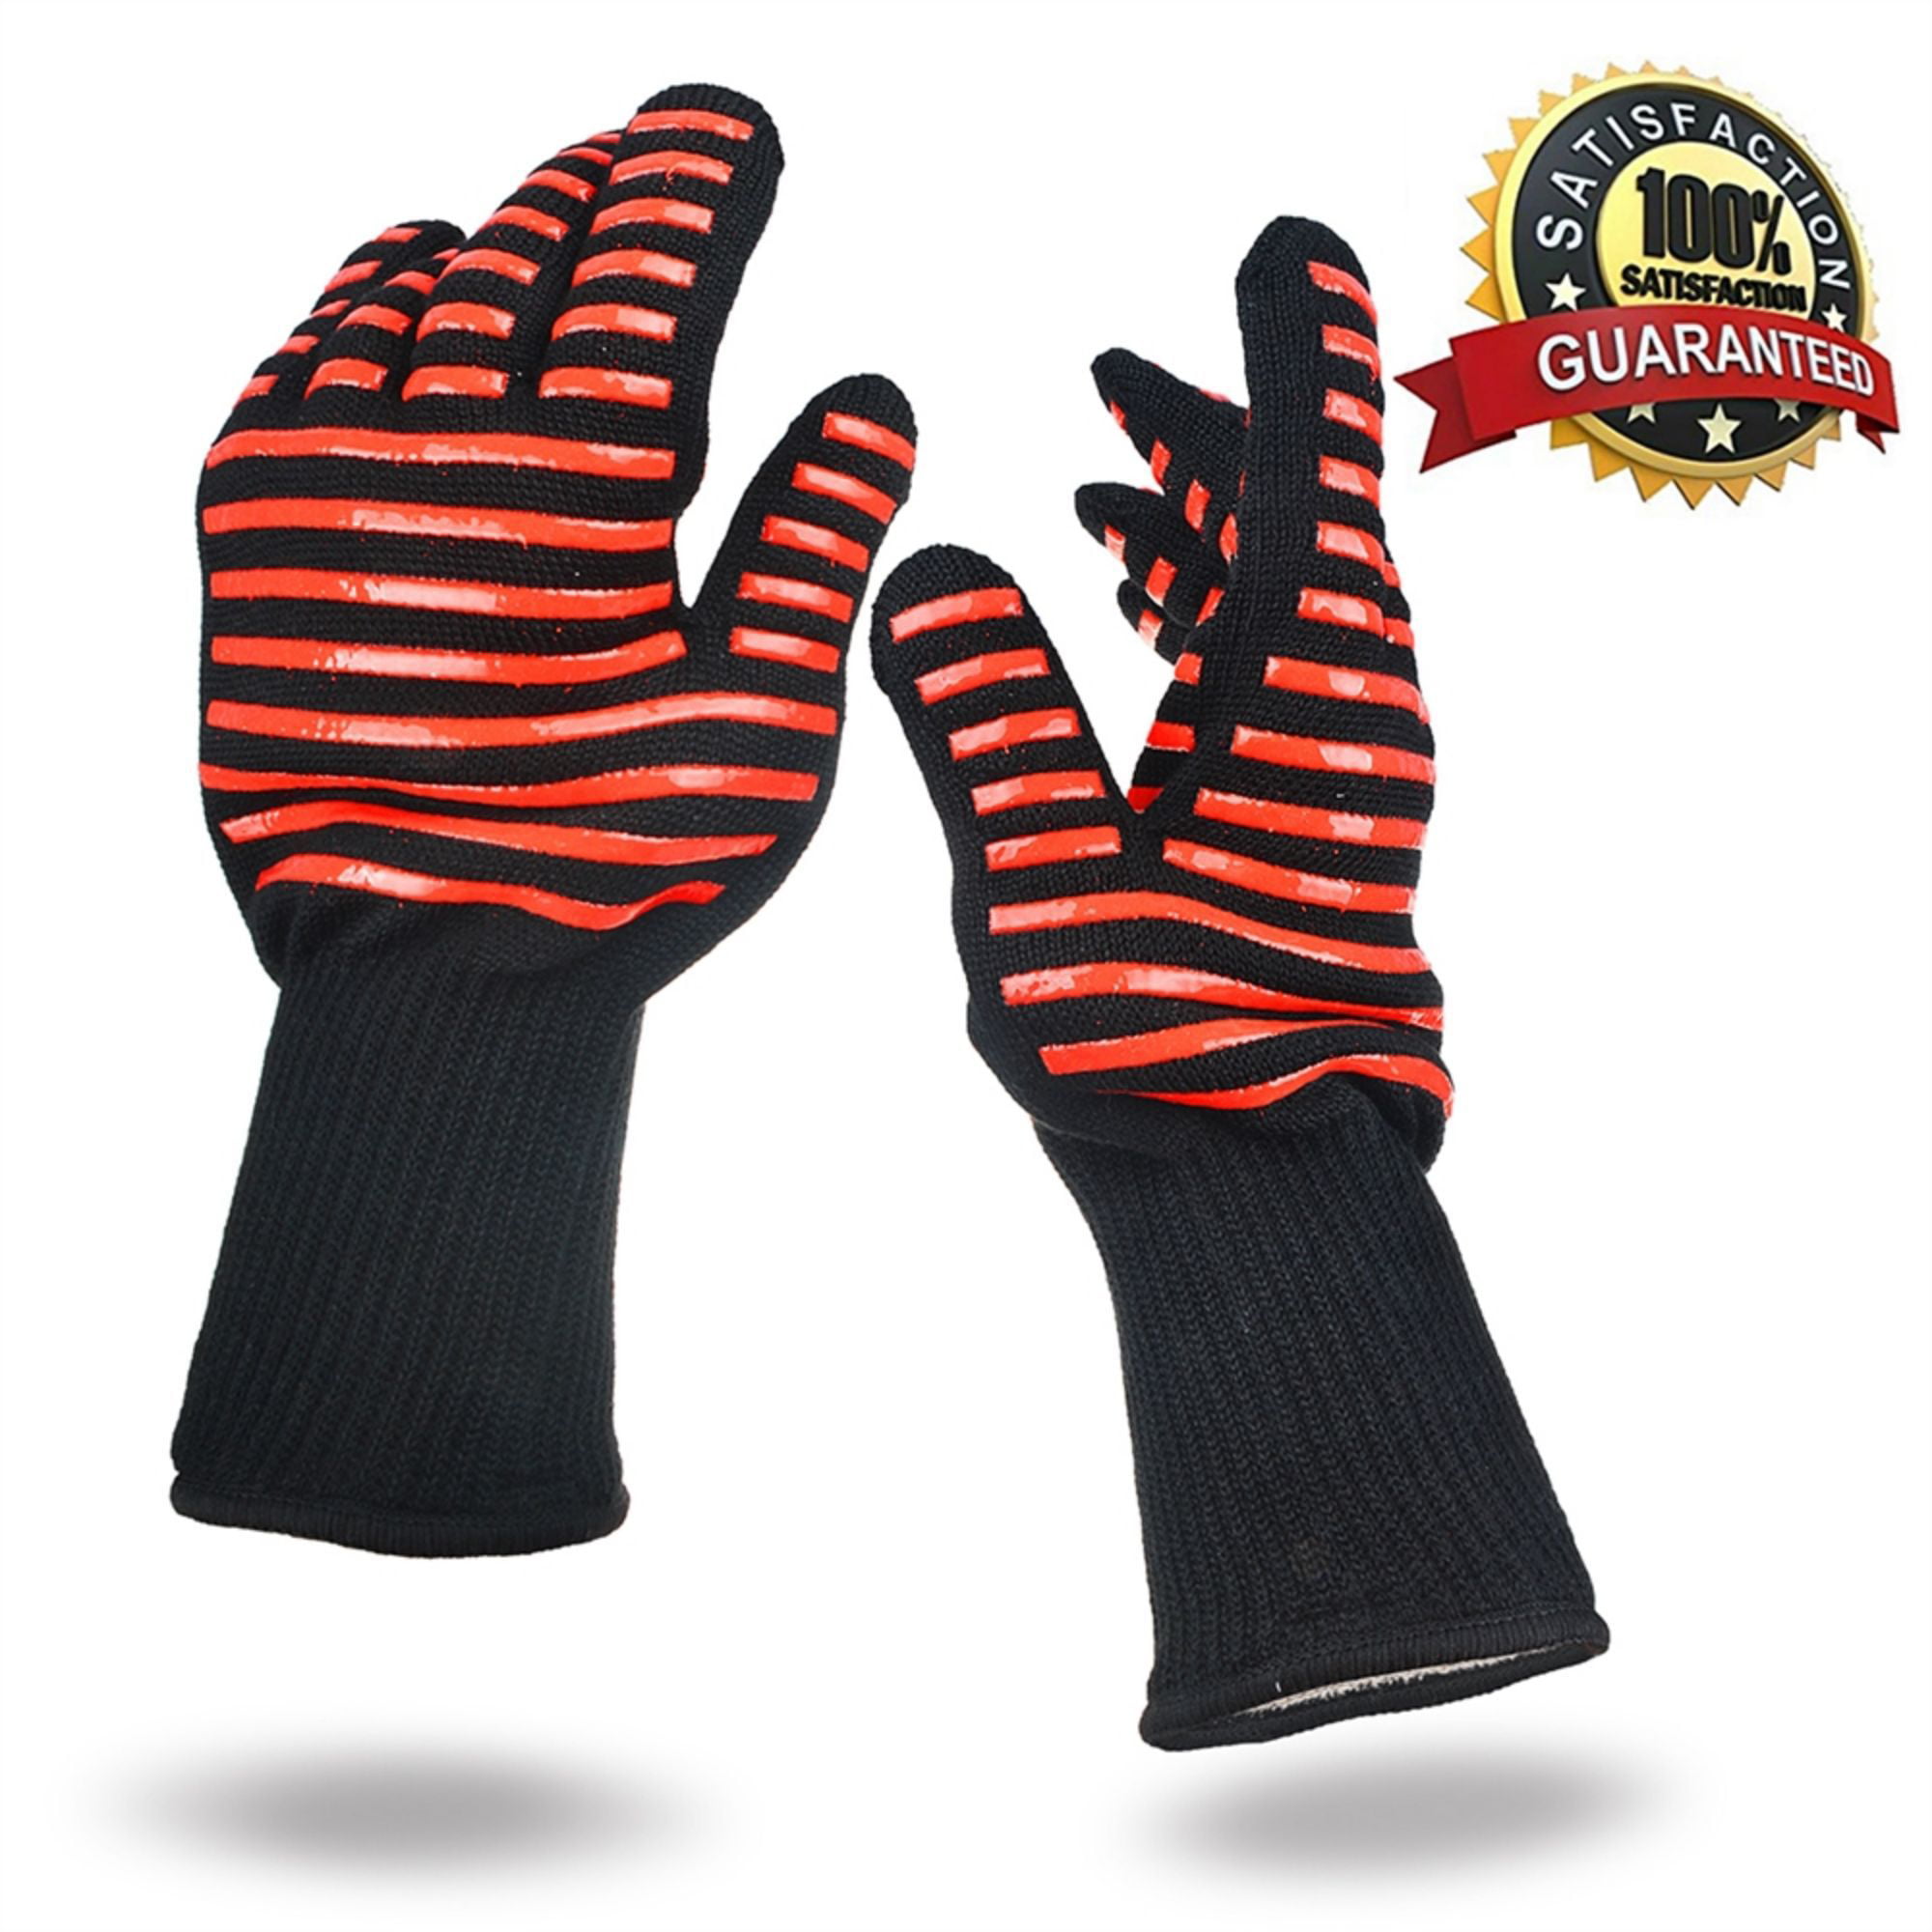 Resistant to 932°F Baking or Grilling Heat Resistant Cooking Gloves for BBQ 